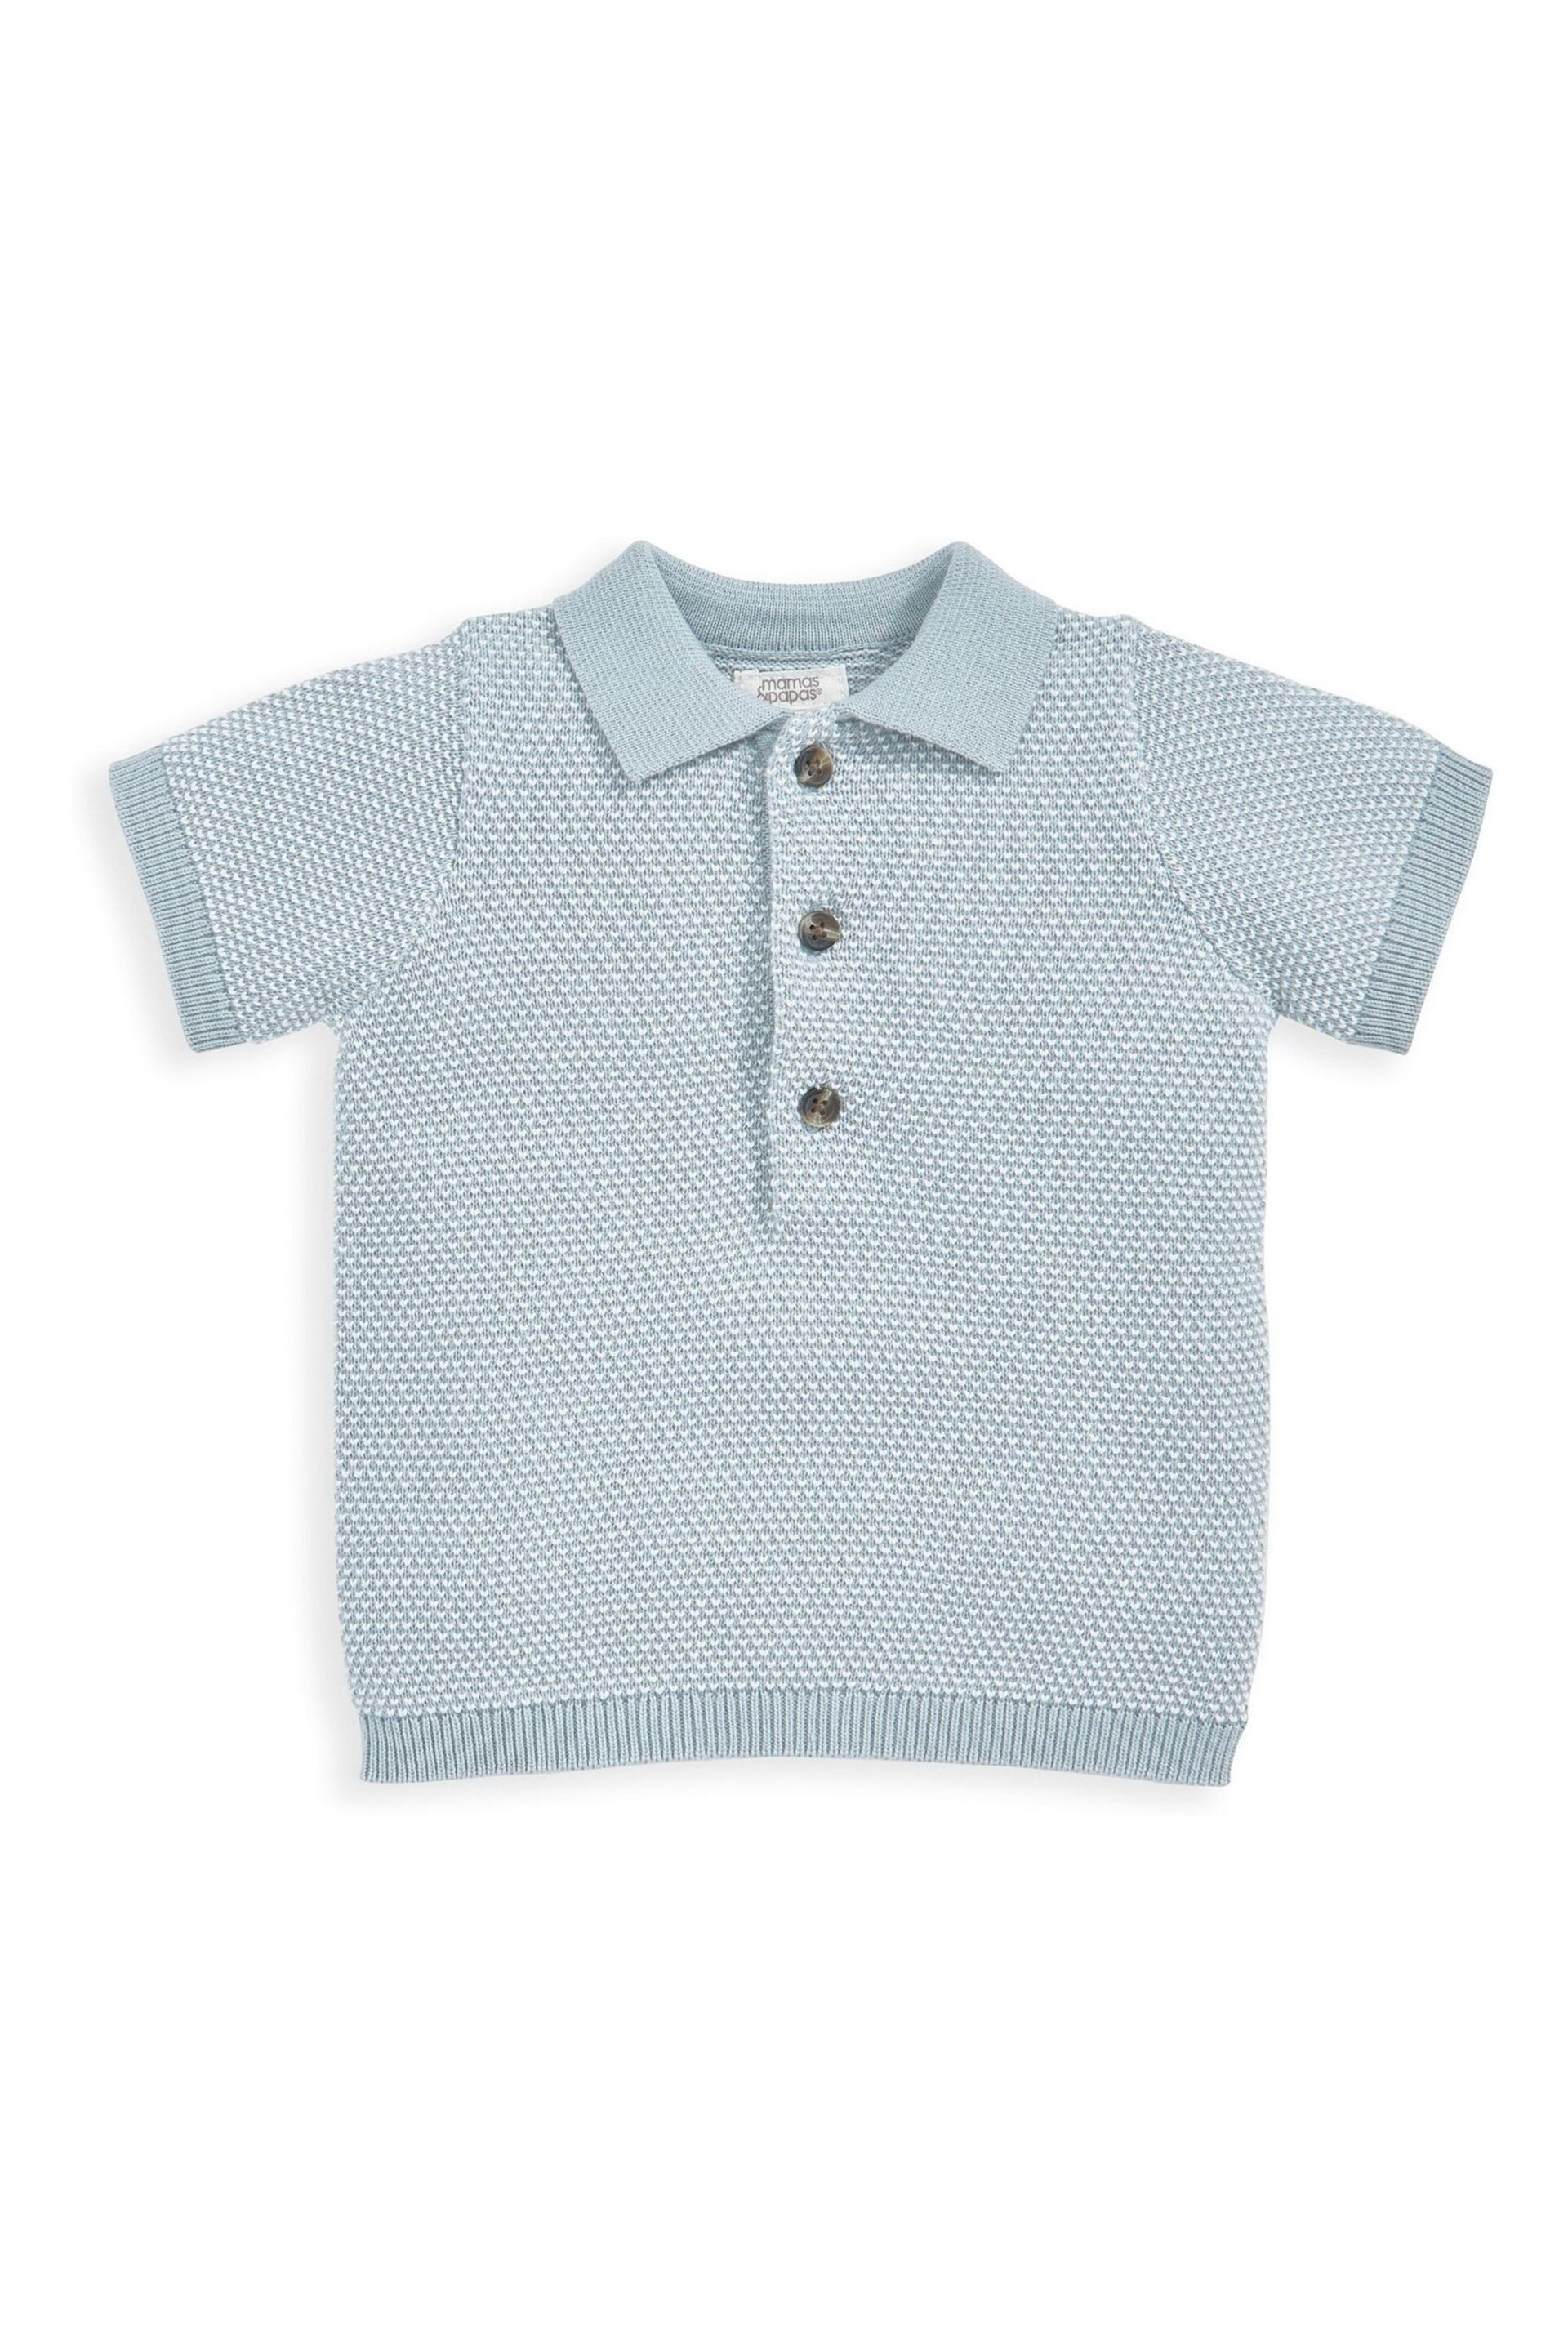 Mamas & Papas Blue Knitted Polo And Shorts Set 2 Piece - Image 3 of 4